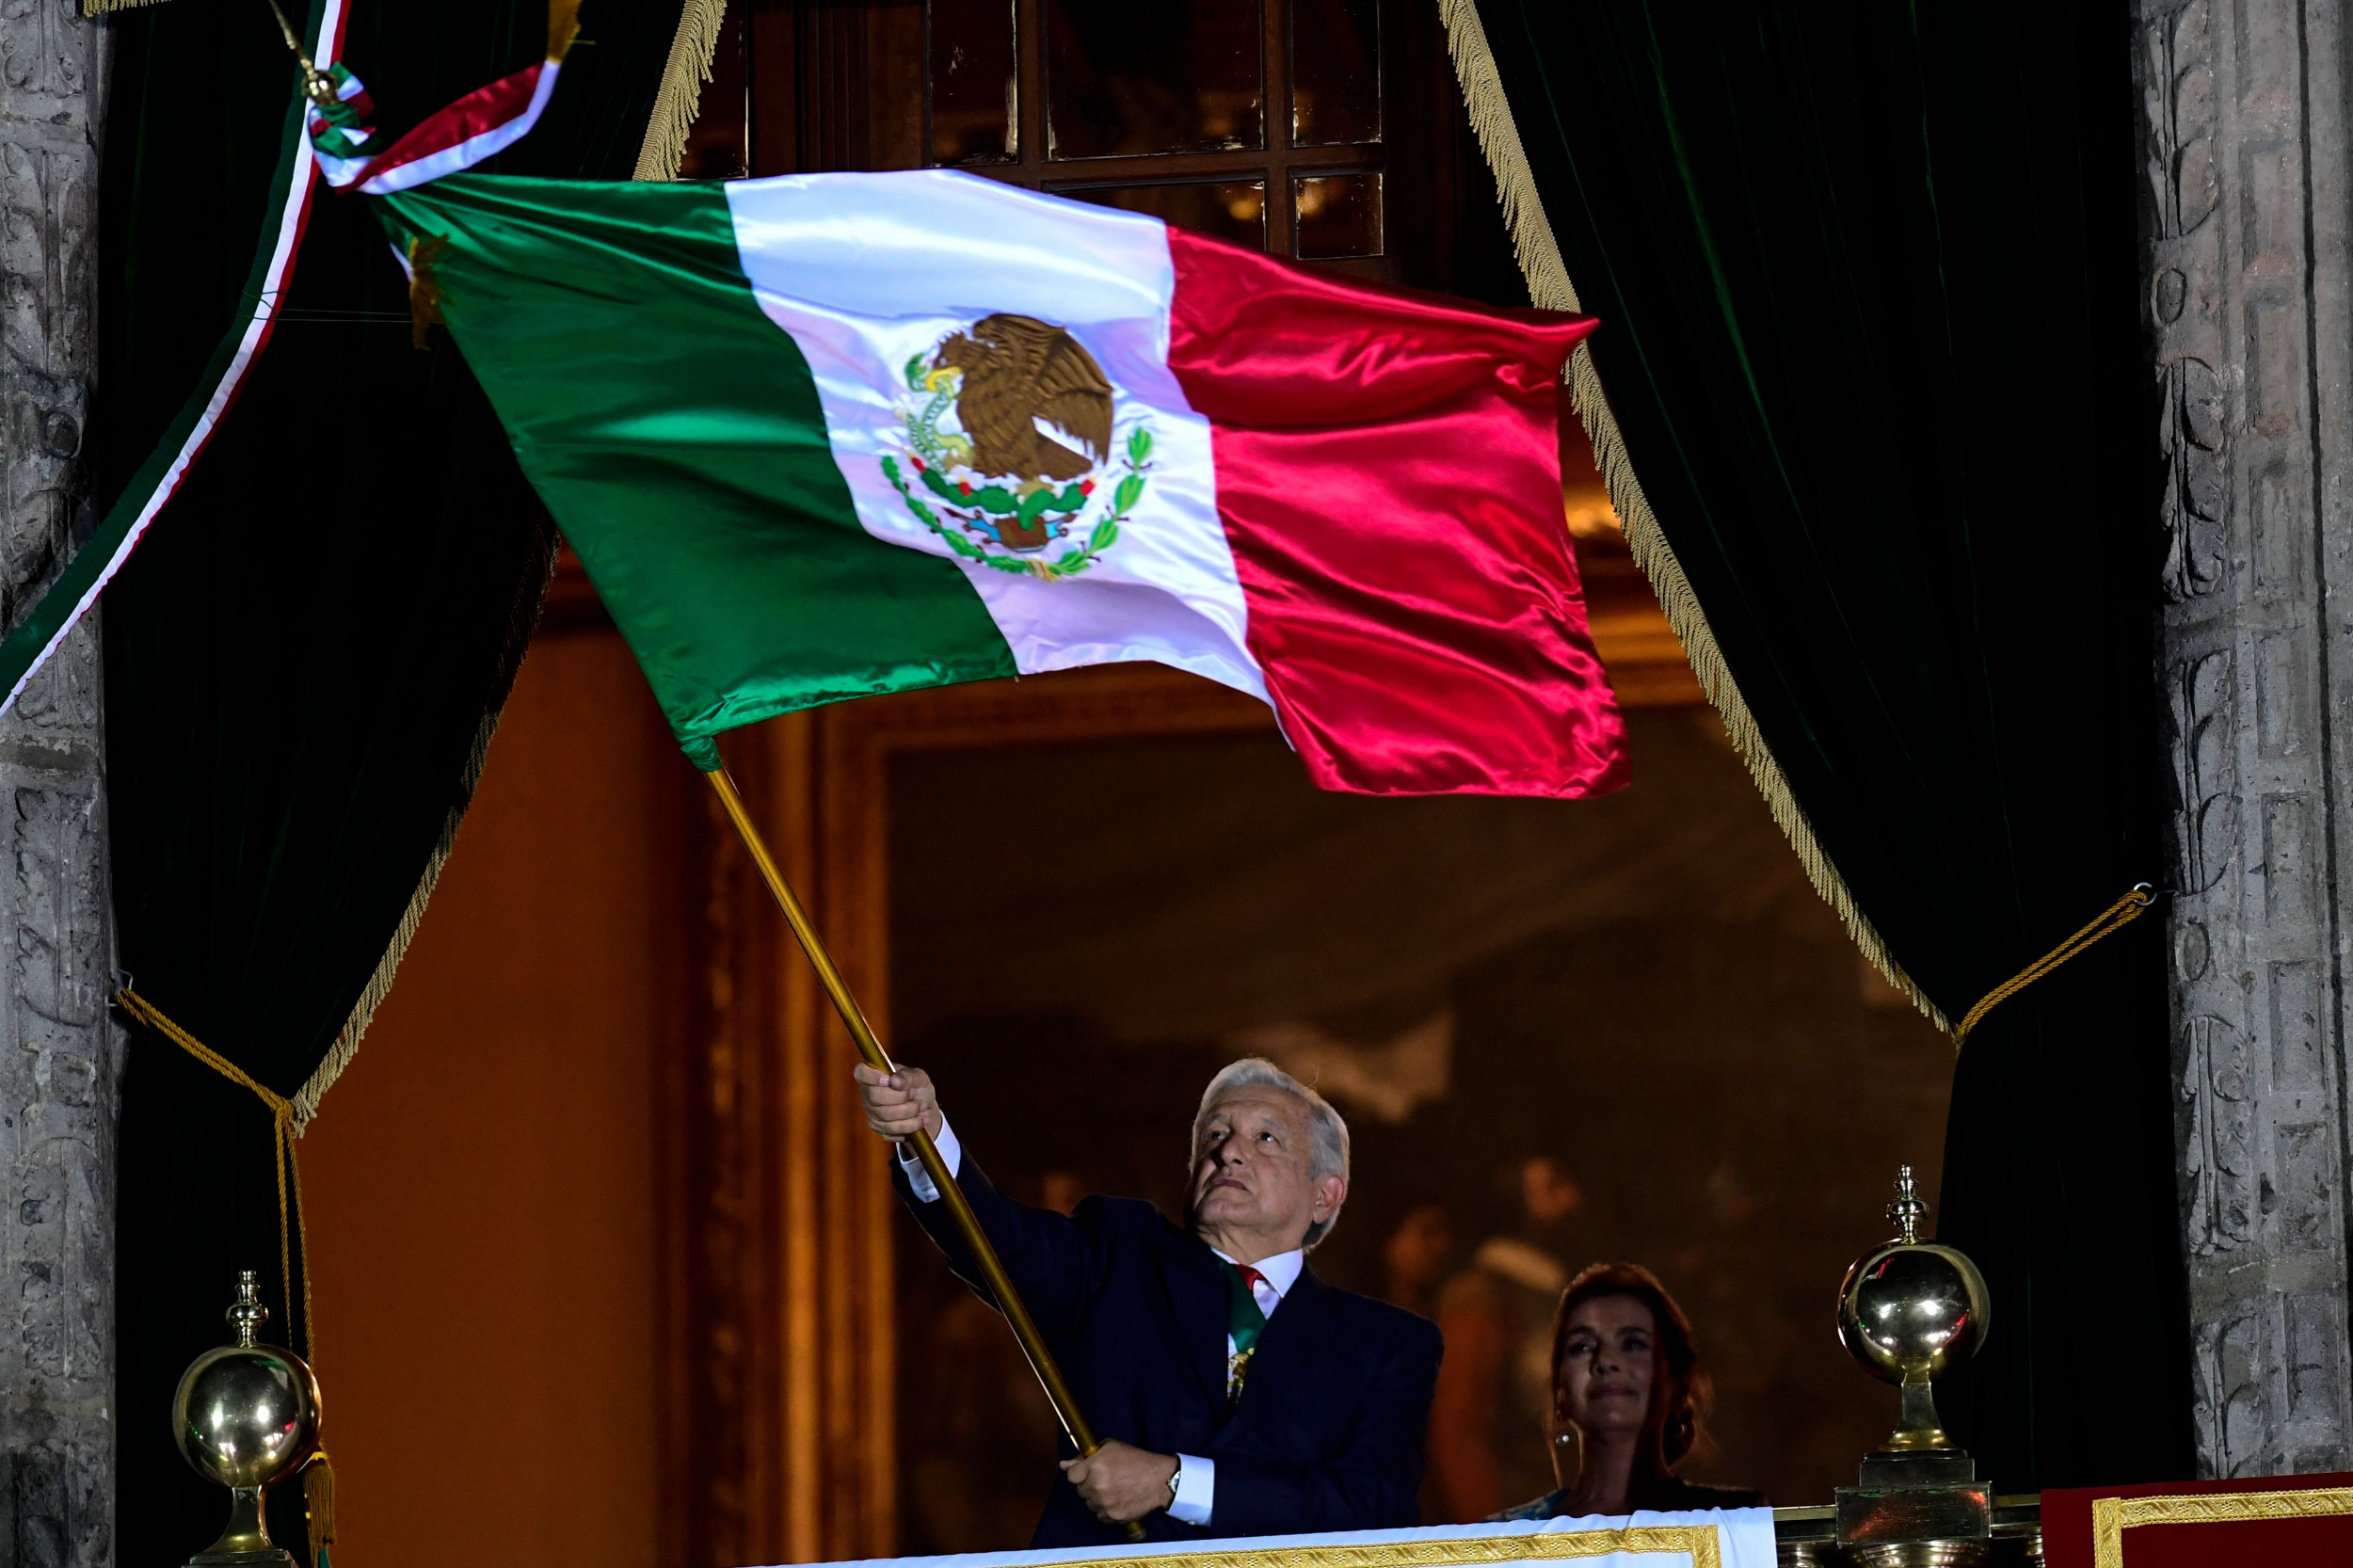 DYK that the first Mexican “Flag Day” was celebrated on February